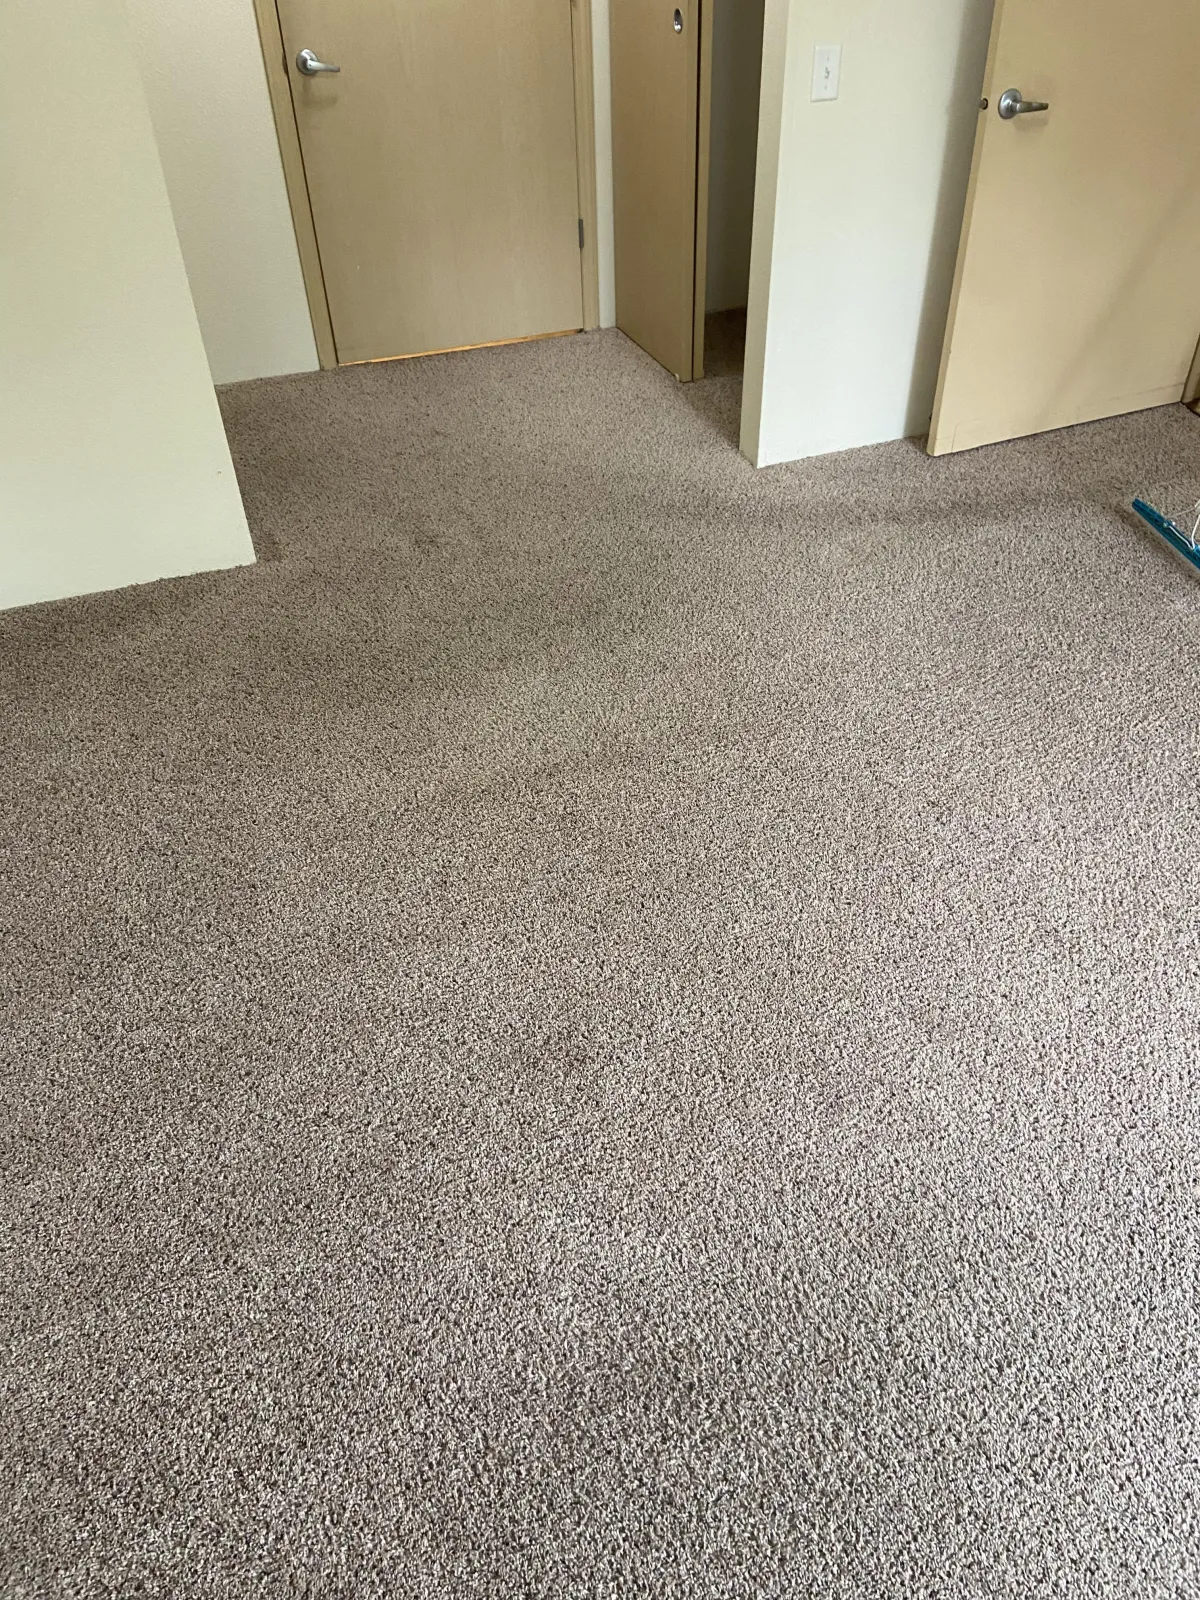 Call me to request a free carpet cleaning quote!